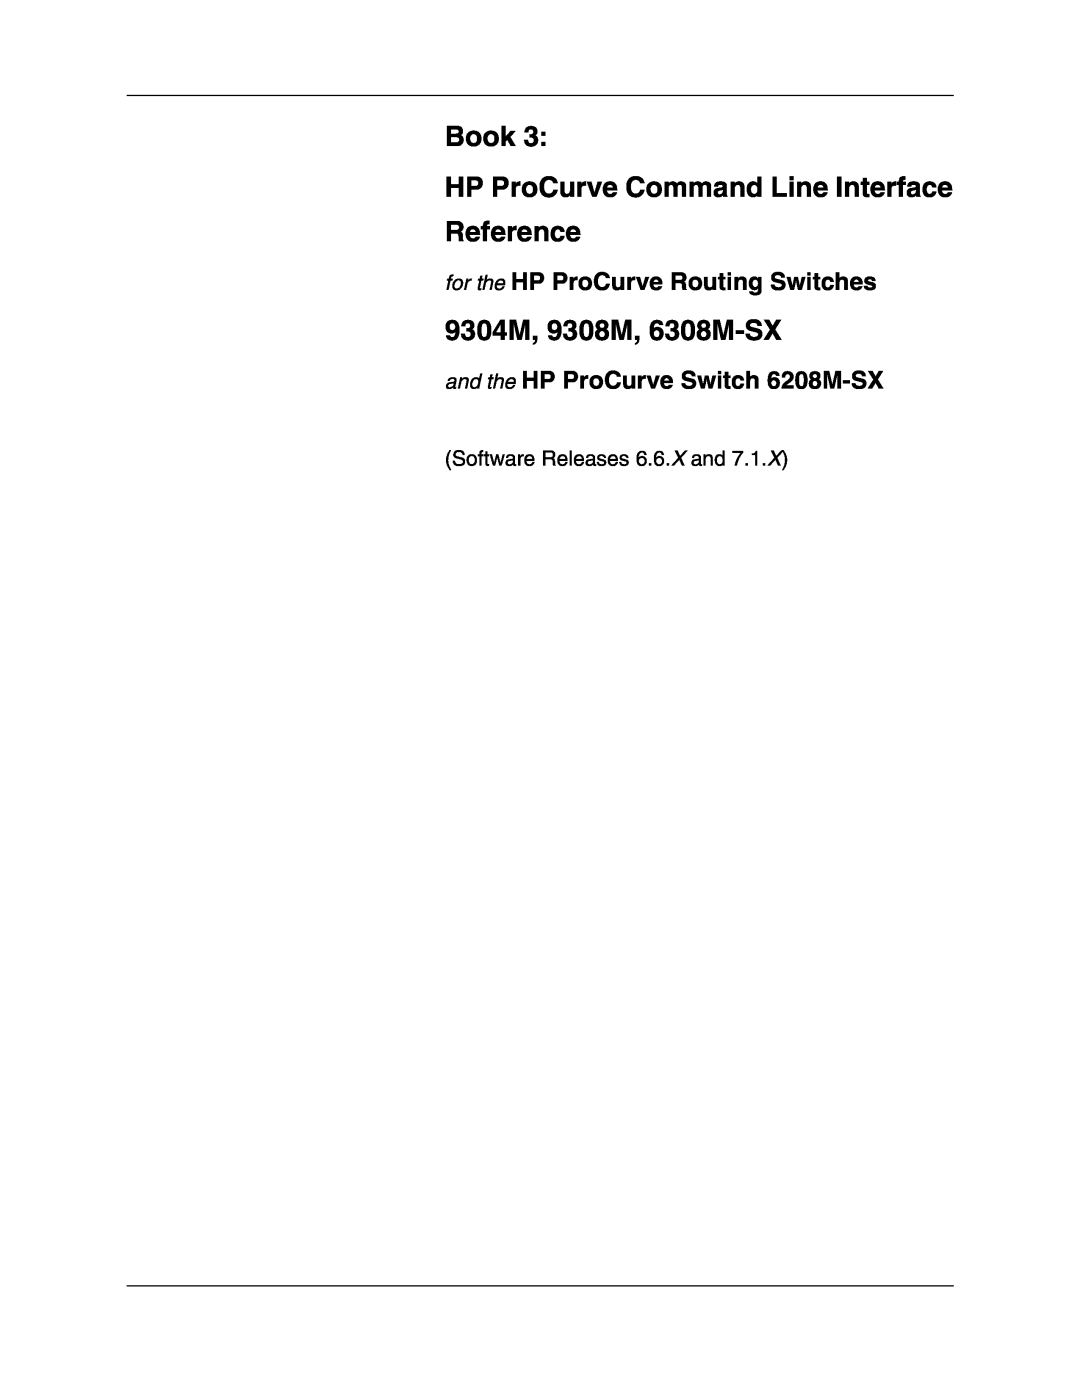 HP Routing 9308M manual for the HP ProCurve Routing Switches, and the HP ProCurve Switch 6208M-SX, 9304M, 9308M, 6308M-SX 